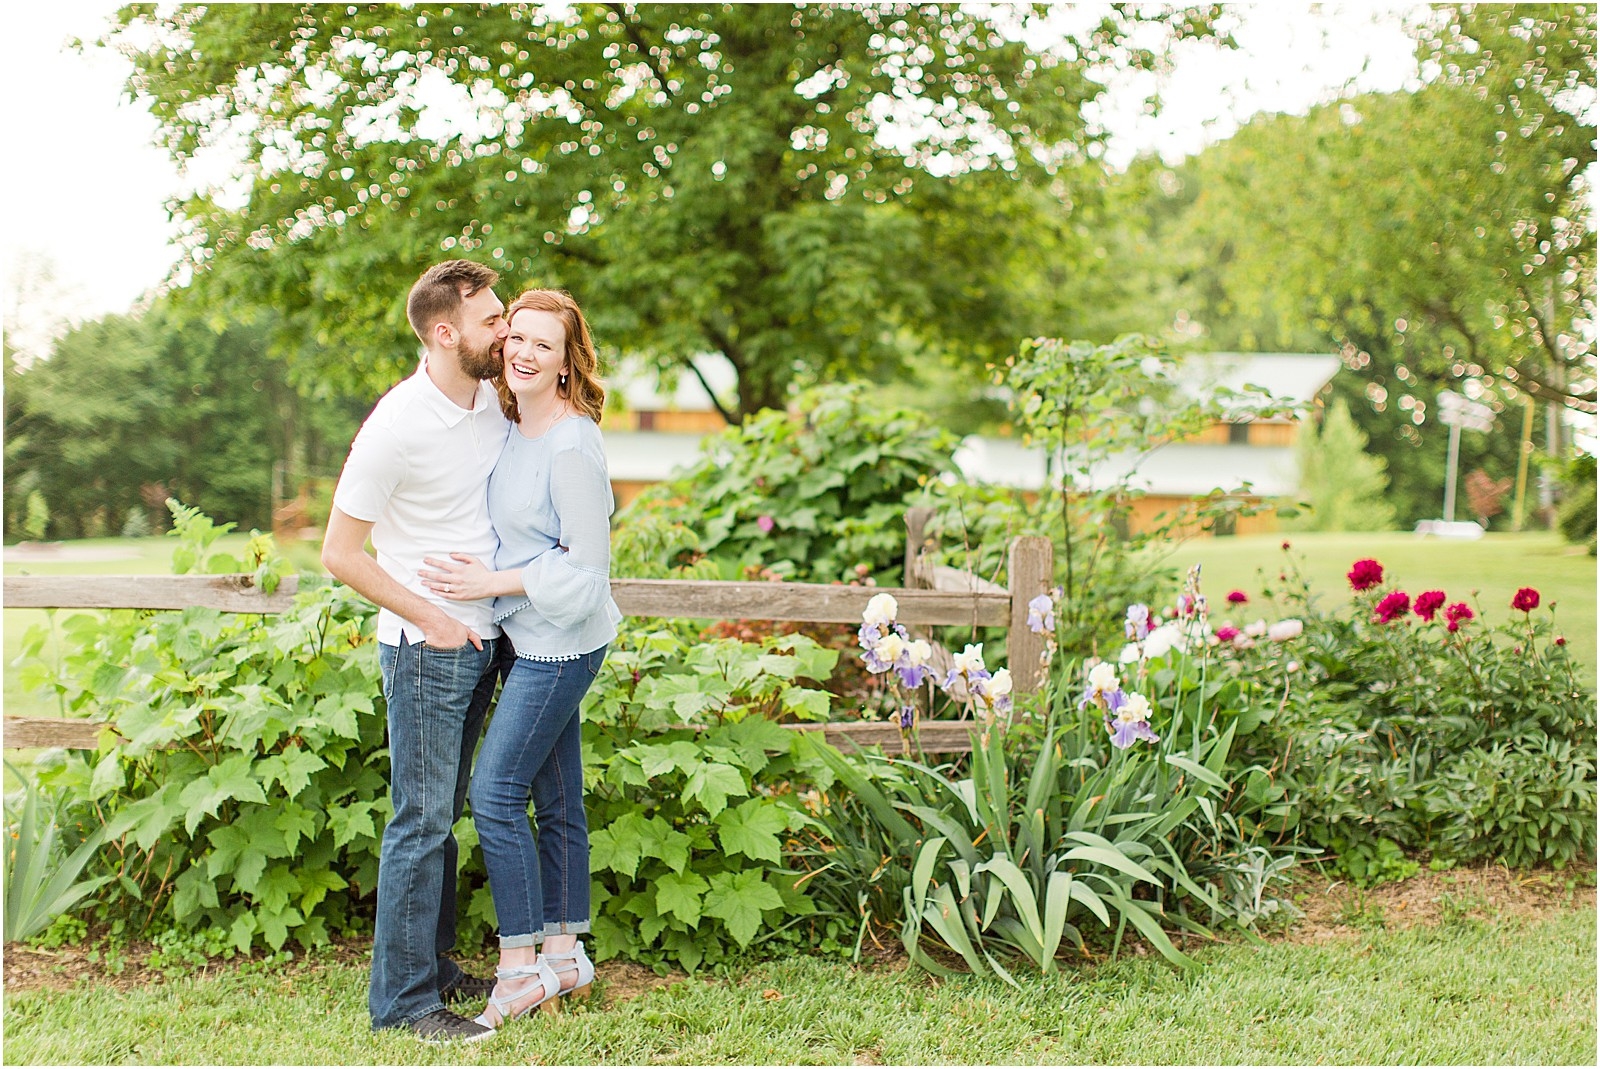 Amy and Logan | The Corner House Bed and Breakfast | Engagement Session003.jpg